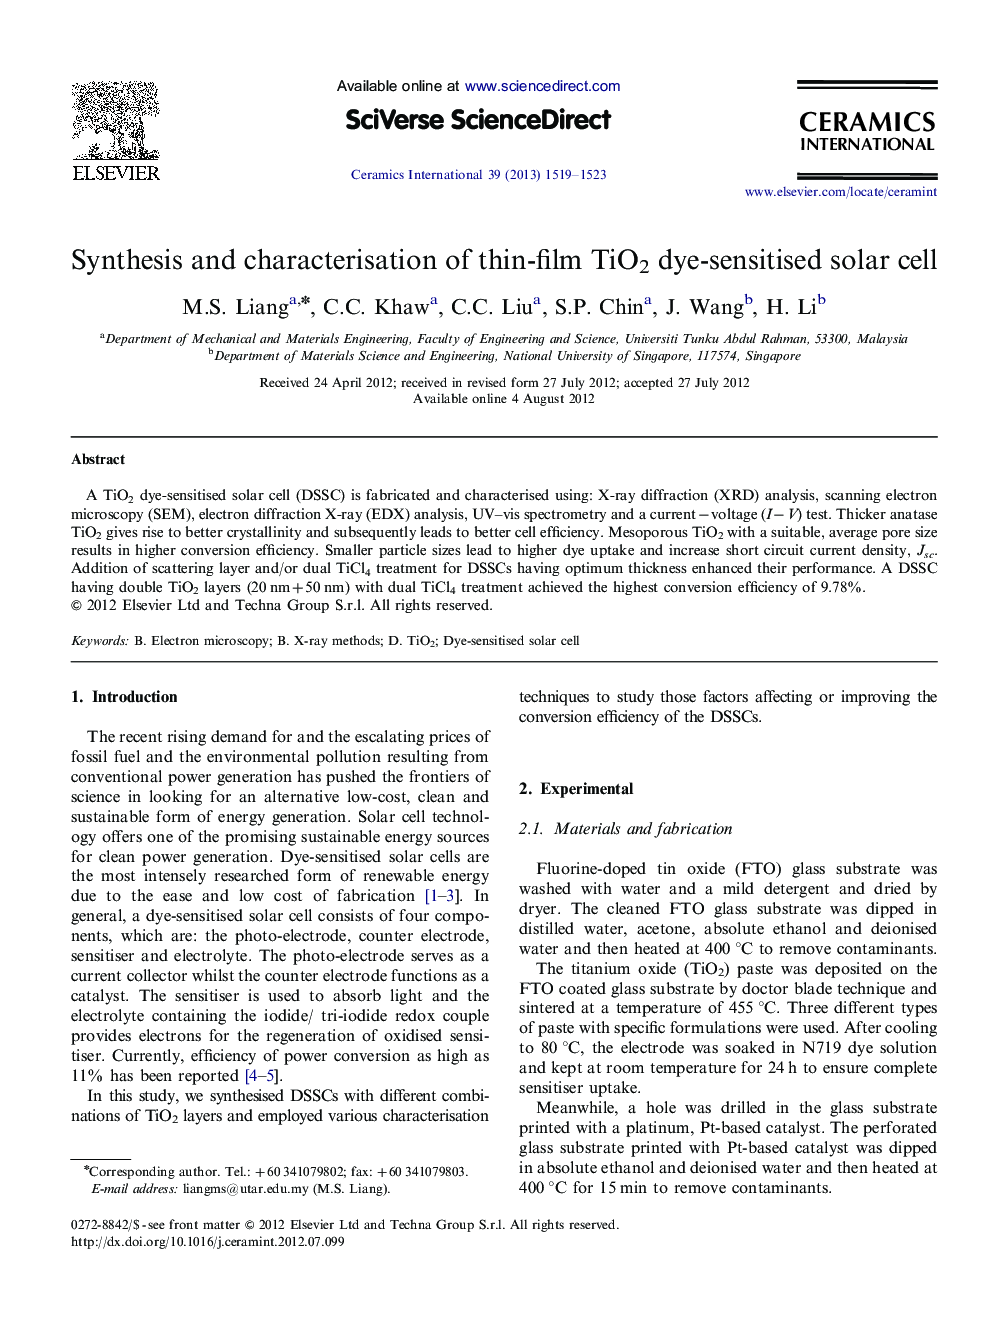 Synthesis and characterisation of thin-film TiO2 dye-sensitised solar cell